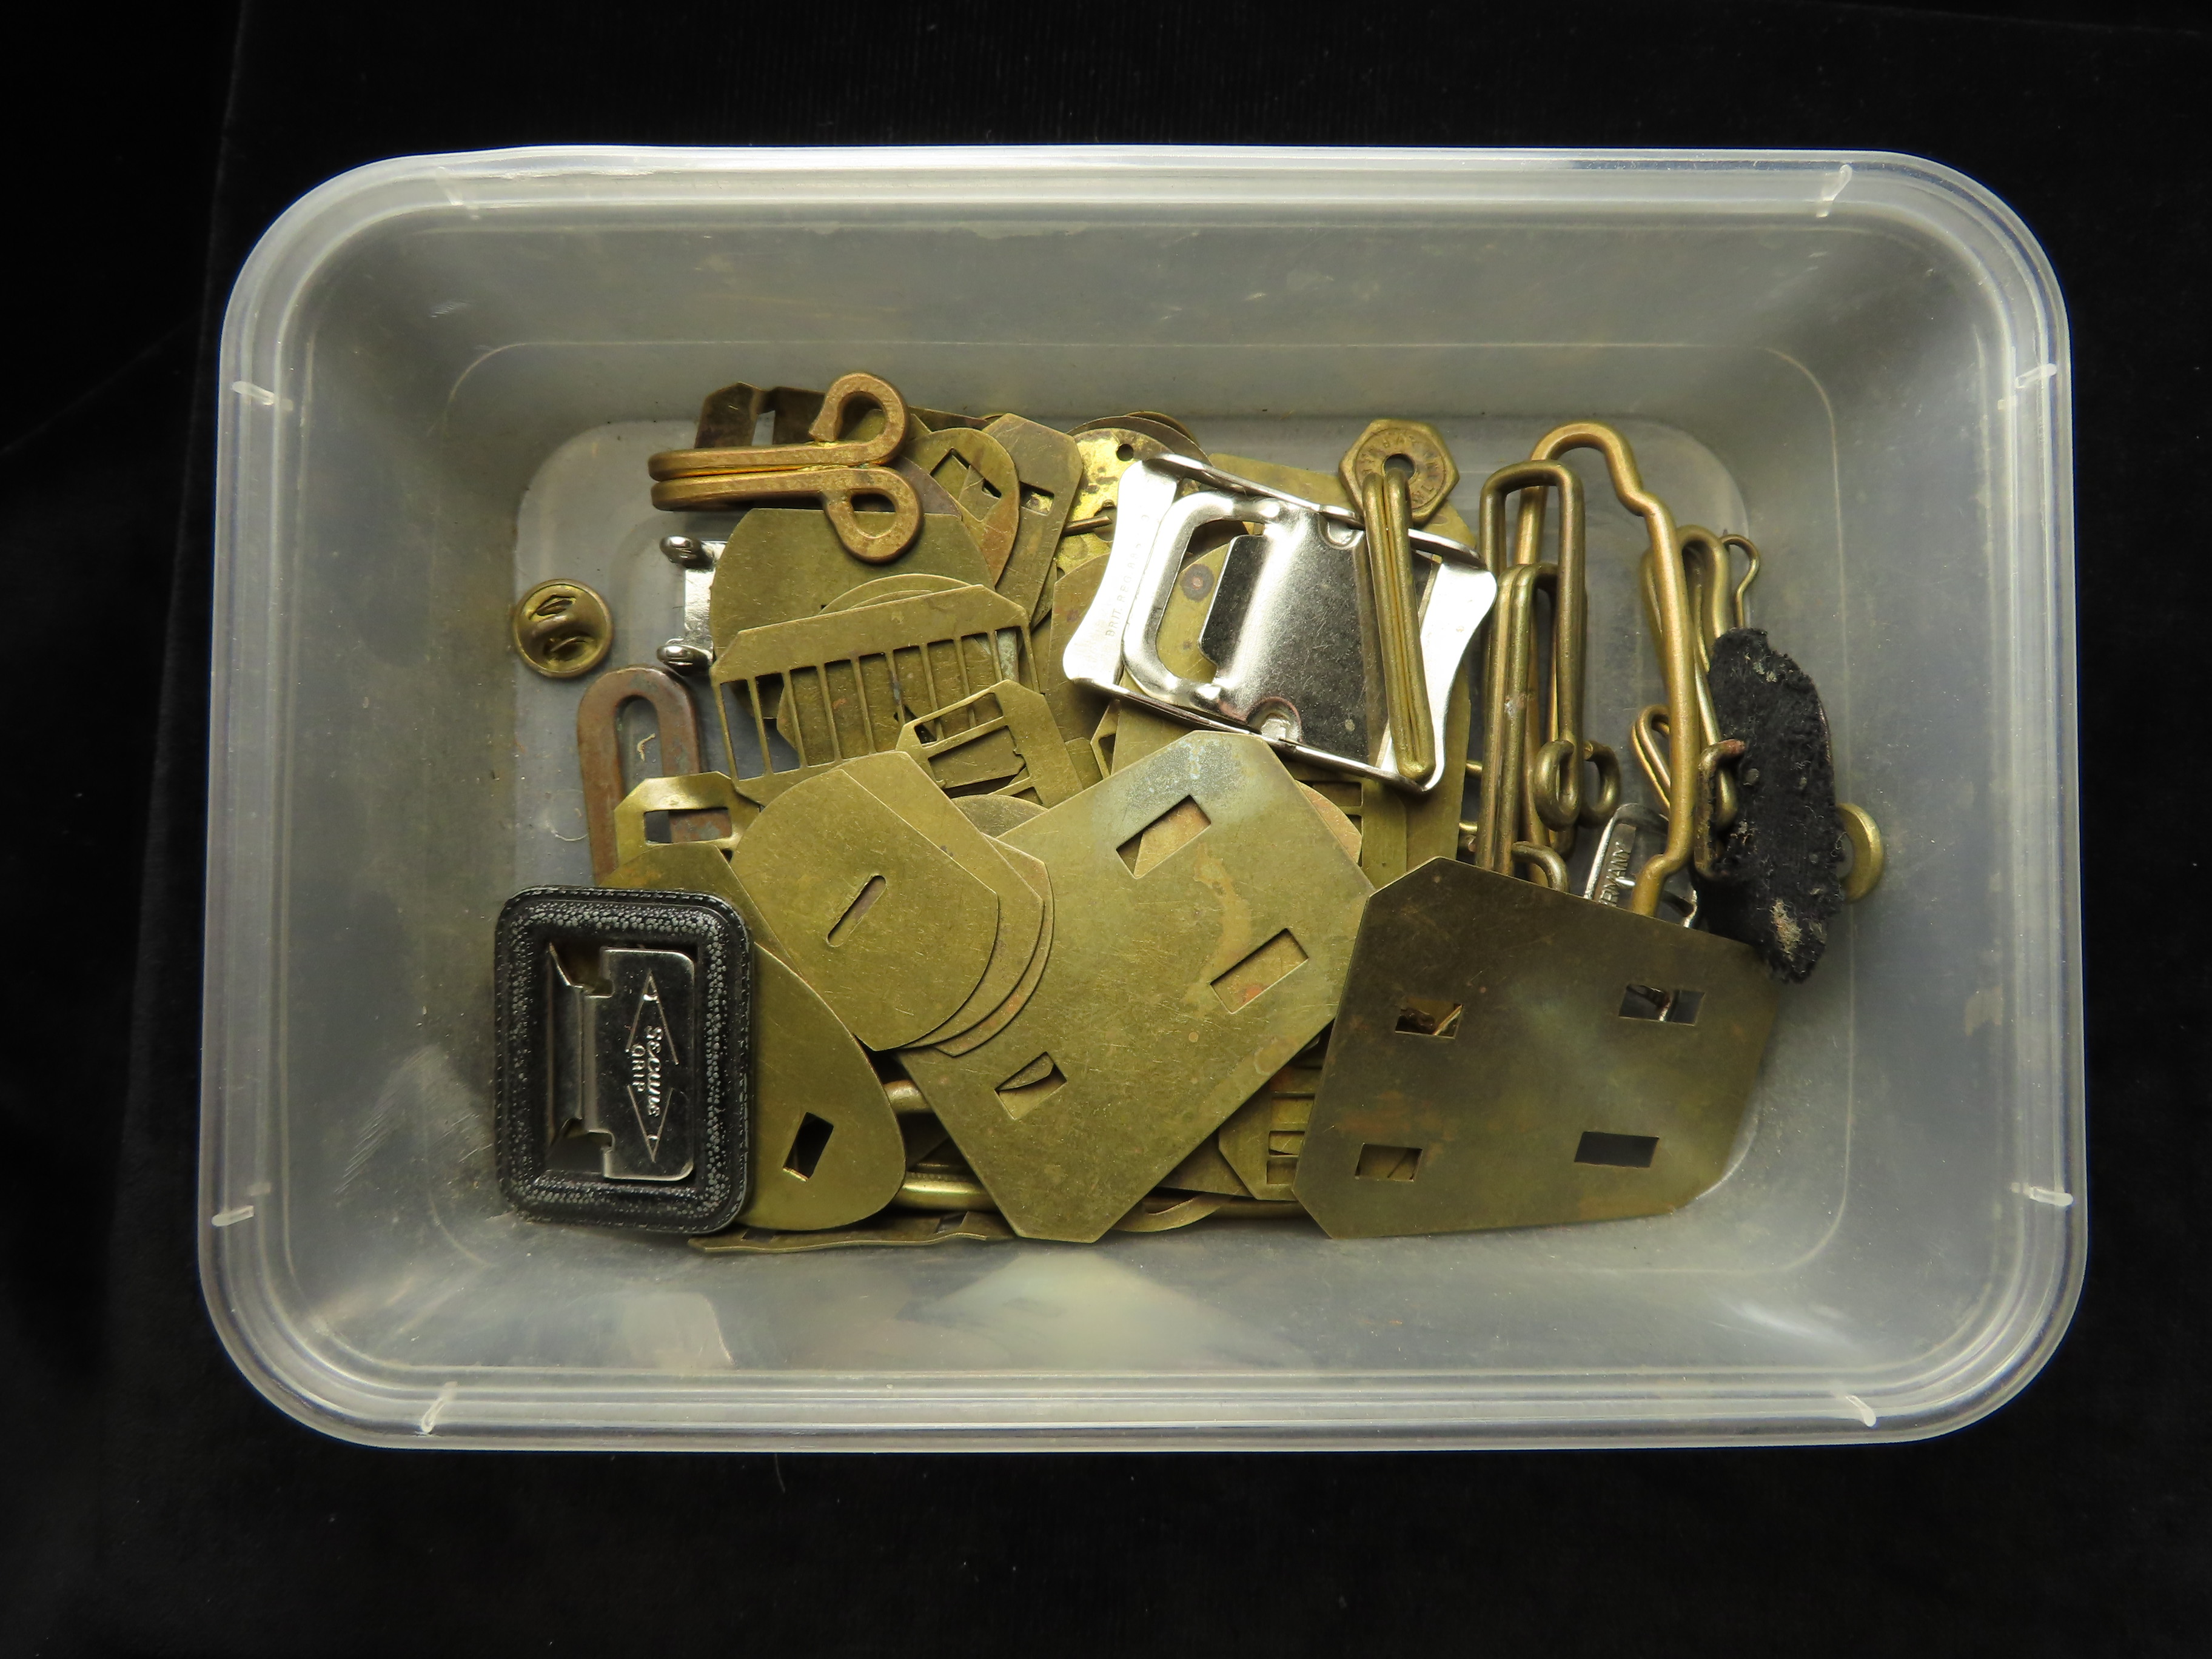 Medals, badges and misc. other items in two plastic tubs (collection recommended) - Image 6 of 8